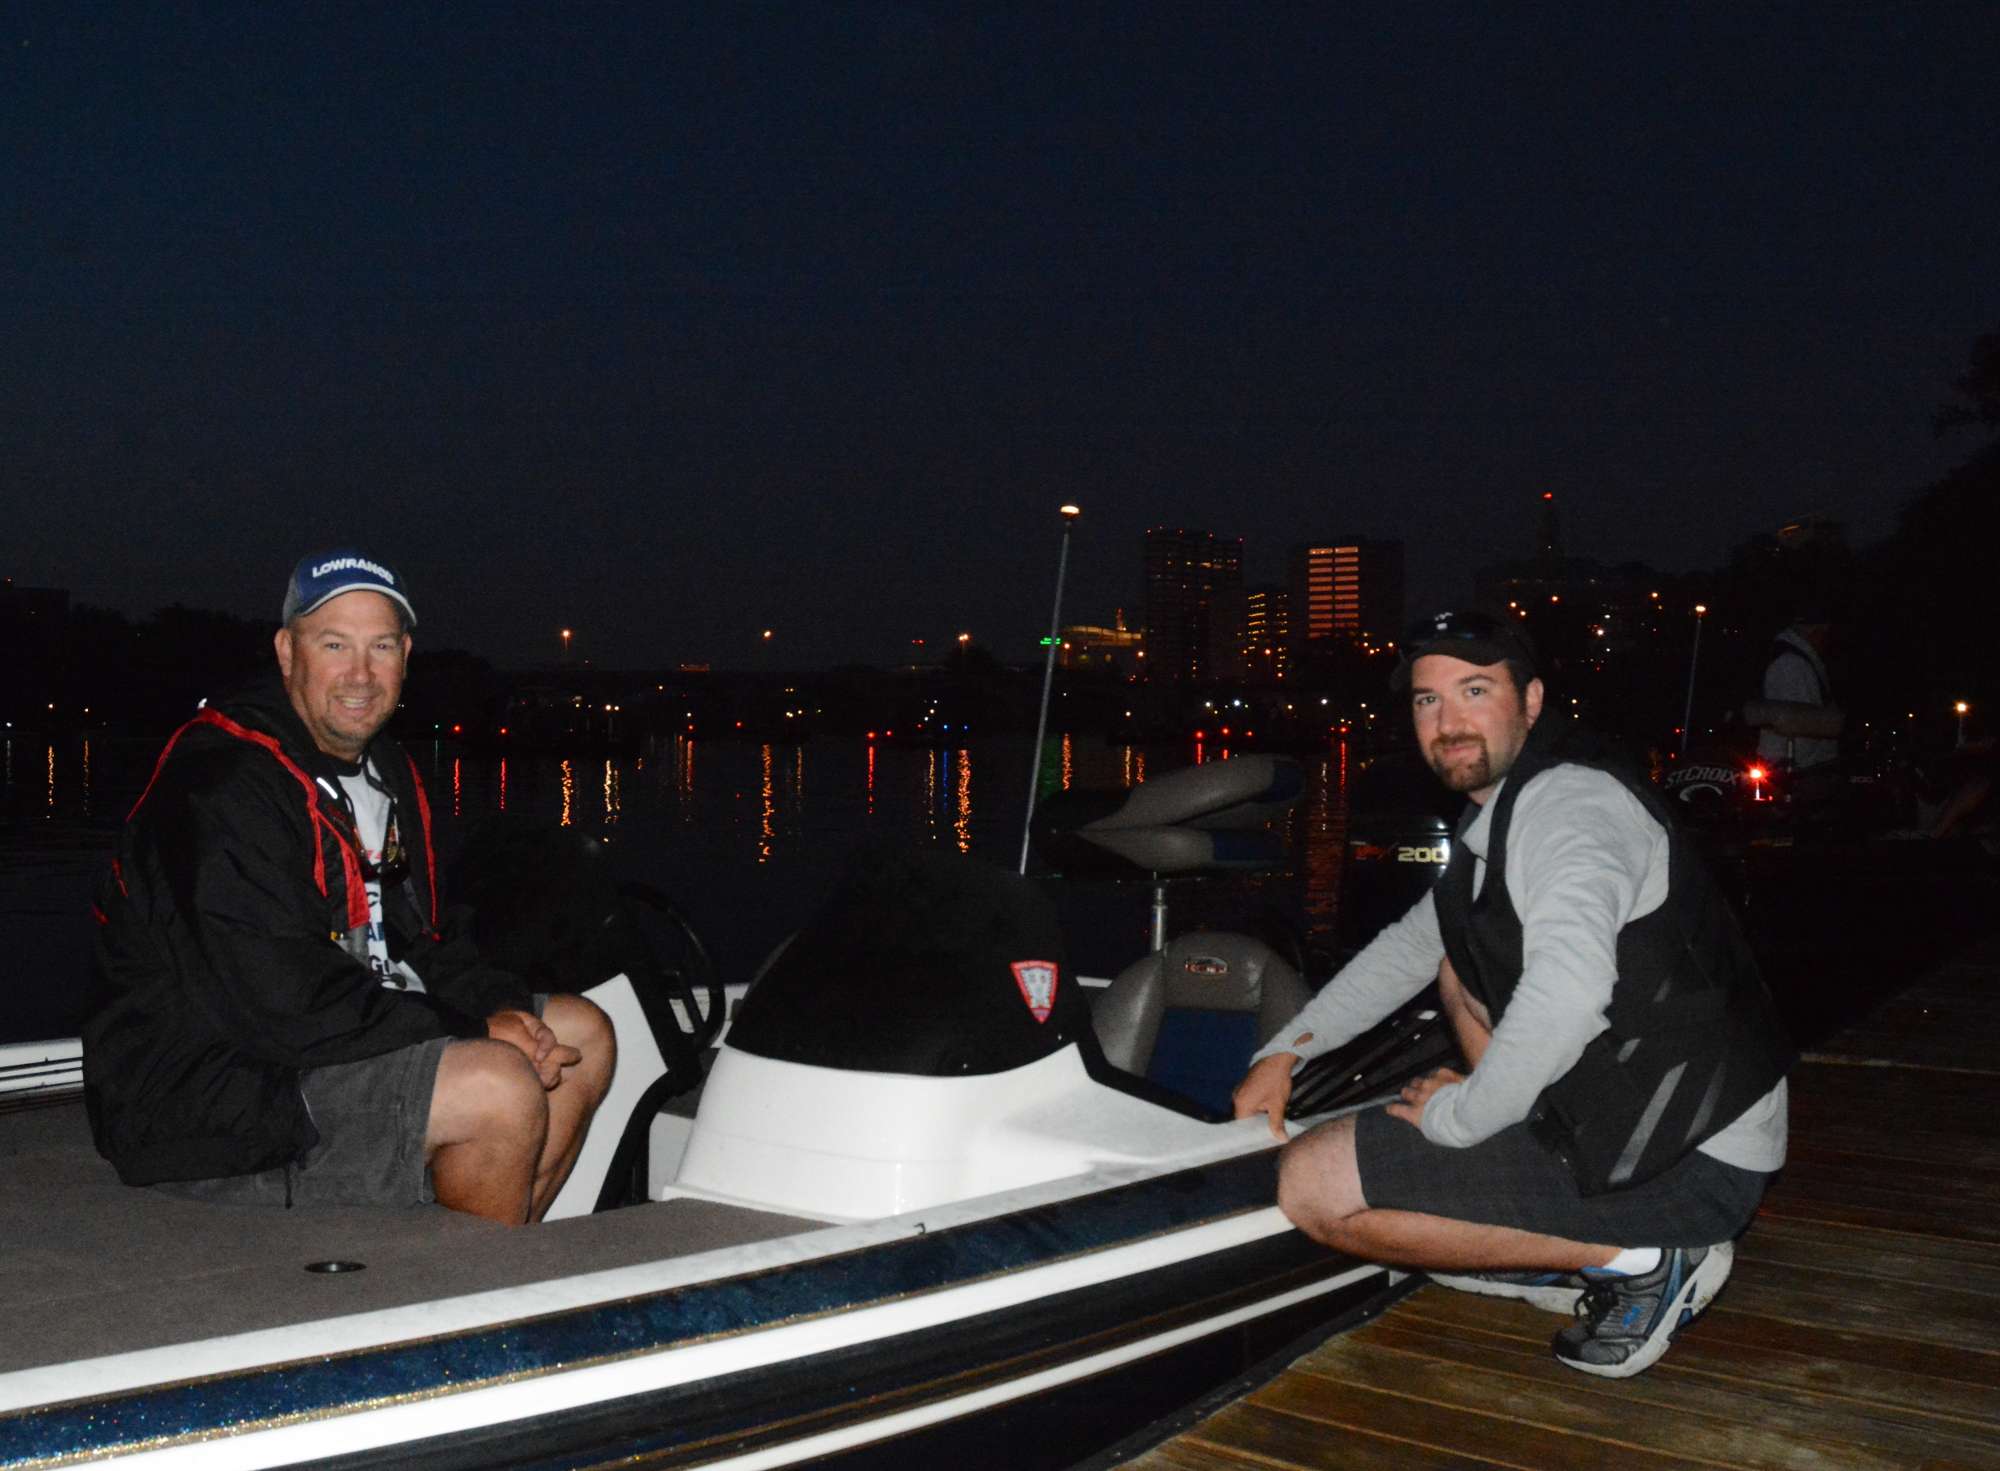 Daryl Biron of Connecticut and Mark Porco of Ontario are boat No. 1 today.